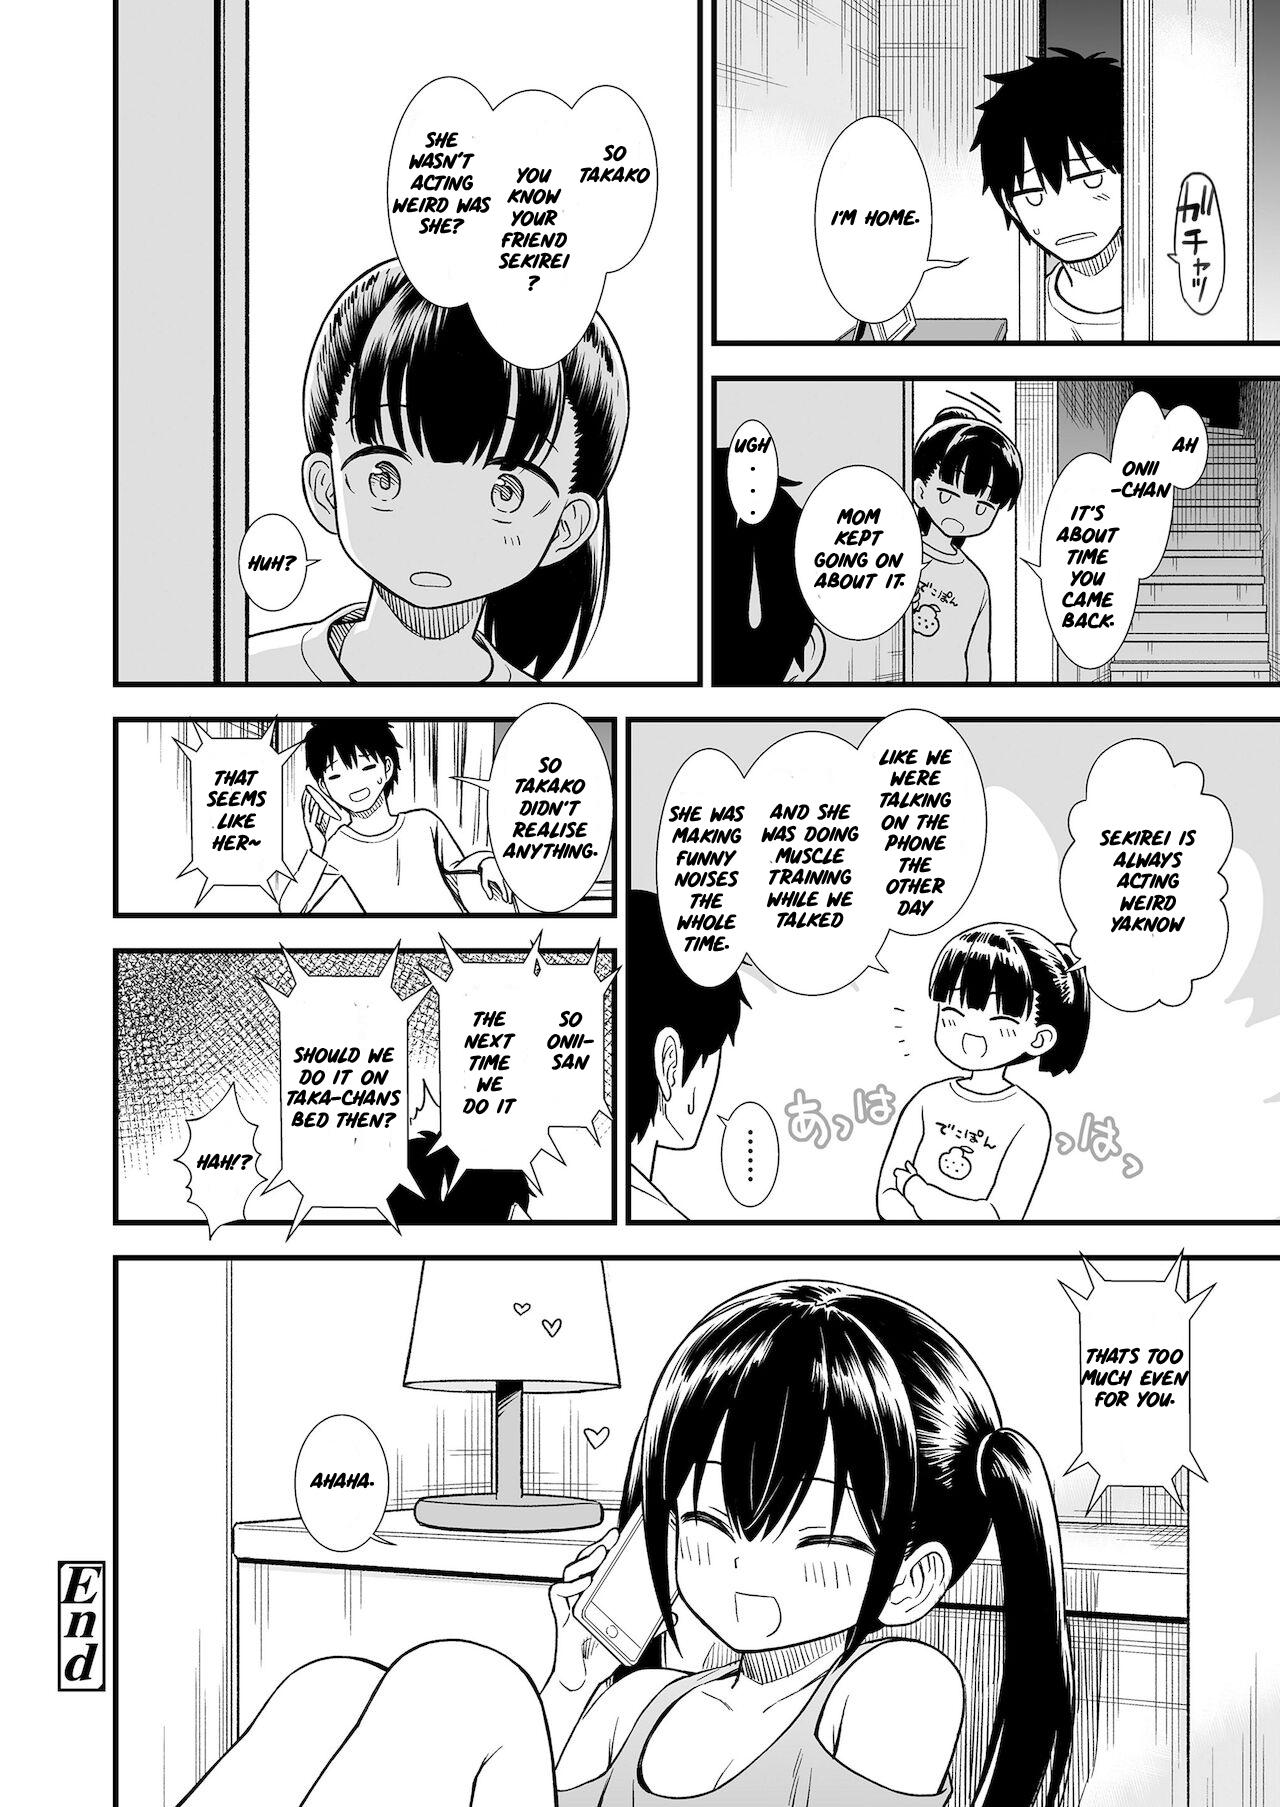 Home Imouto no Tomodachi Homecoming | My Little Sister's Friend Homecoming Jeans - Page 24